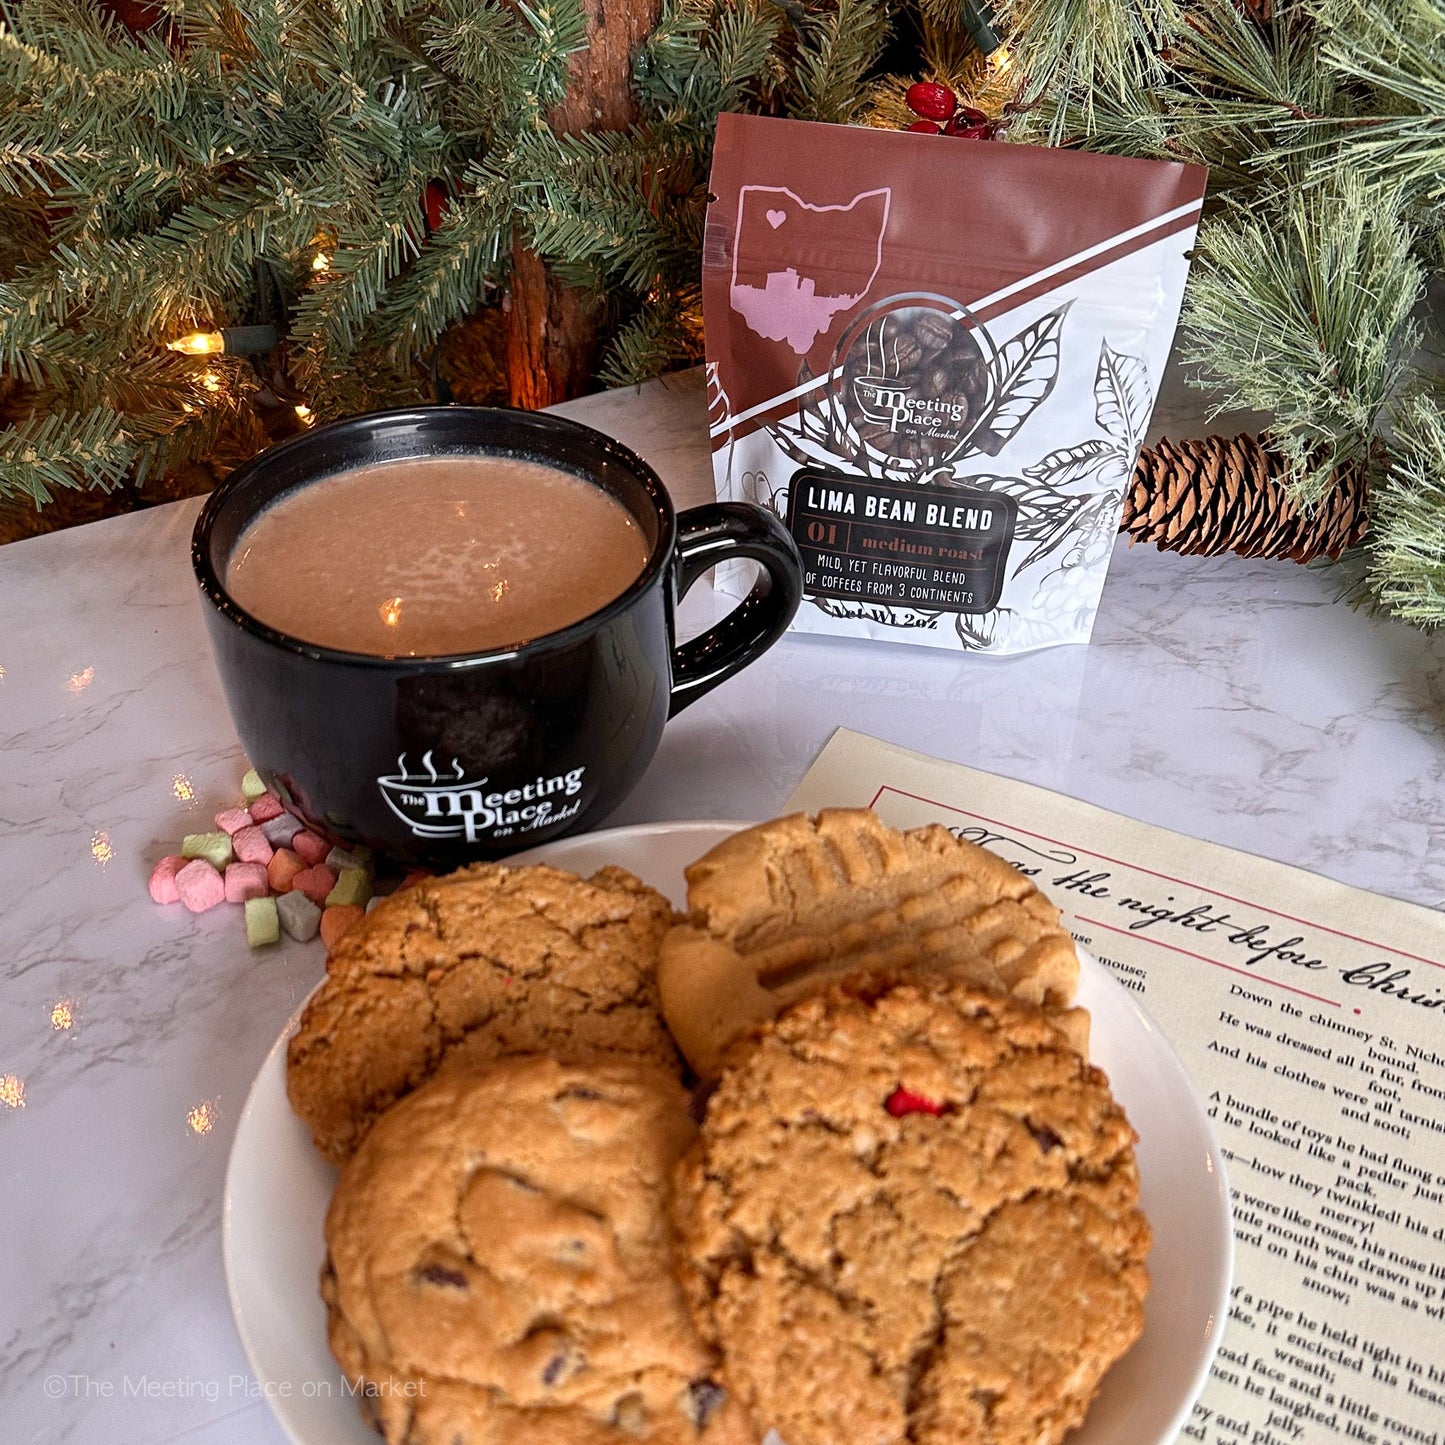 Celebrate Christmas Gift Set with Cookies for Santa and Breakfast with Santa Christmas Gift Basket - The Meeting Place on Market